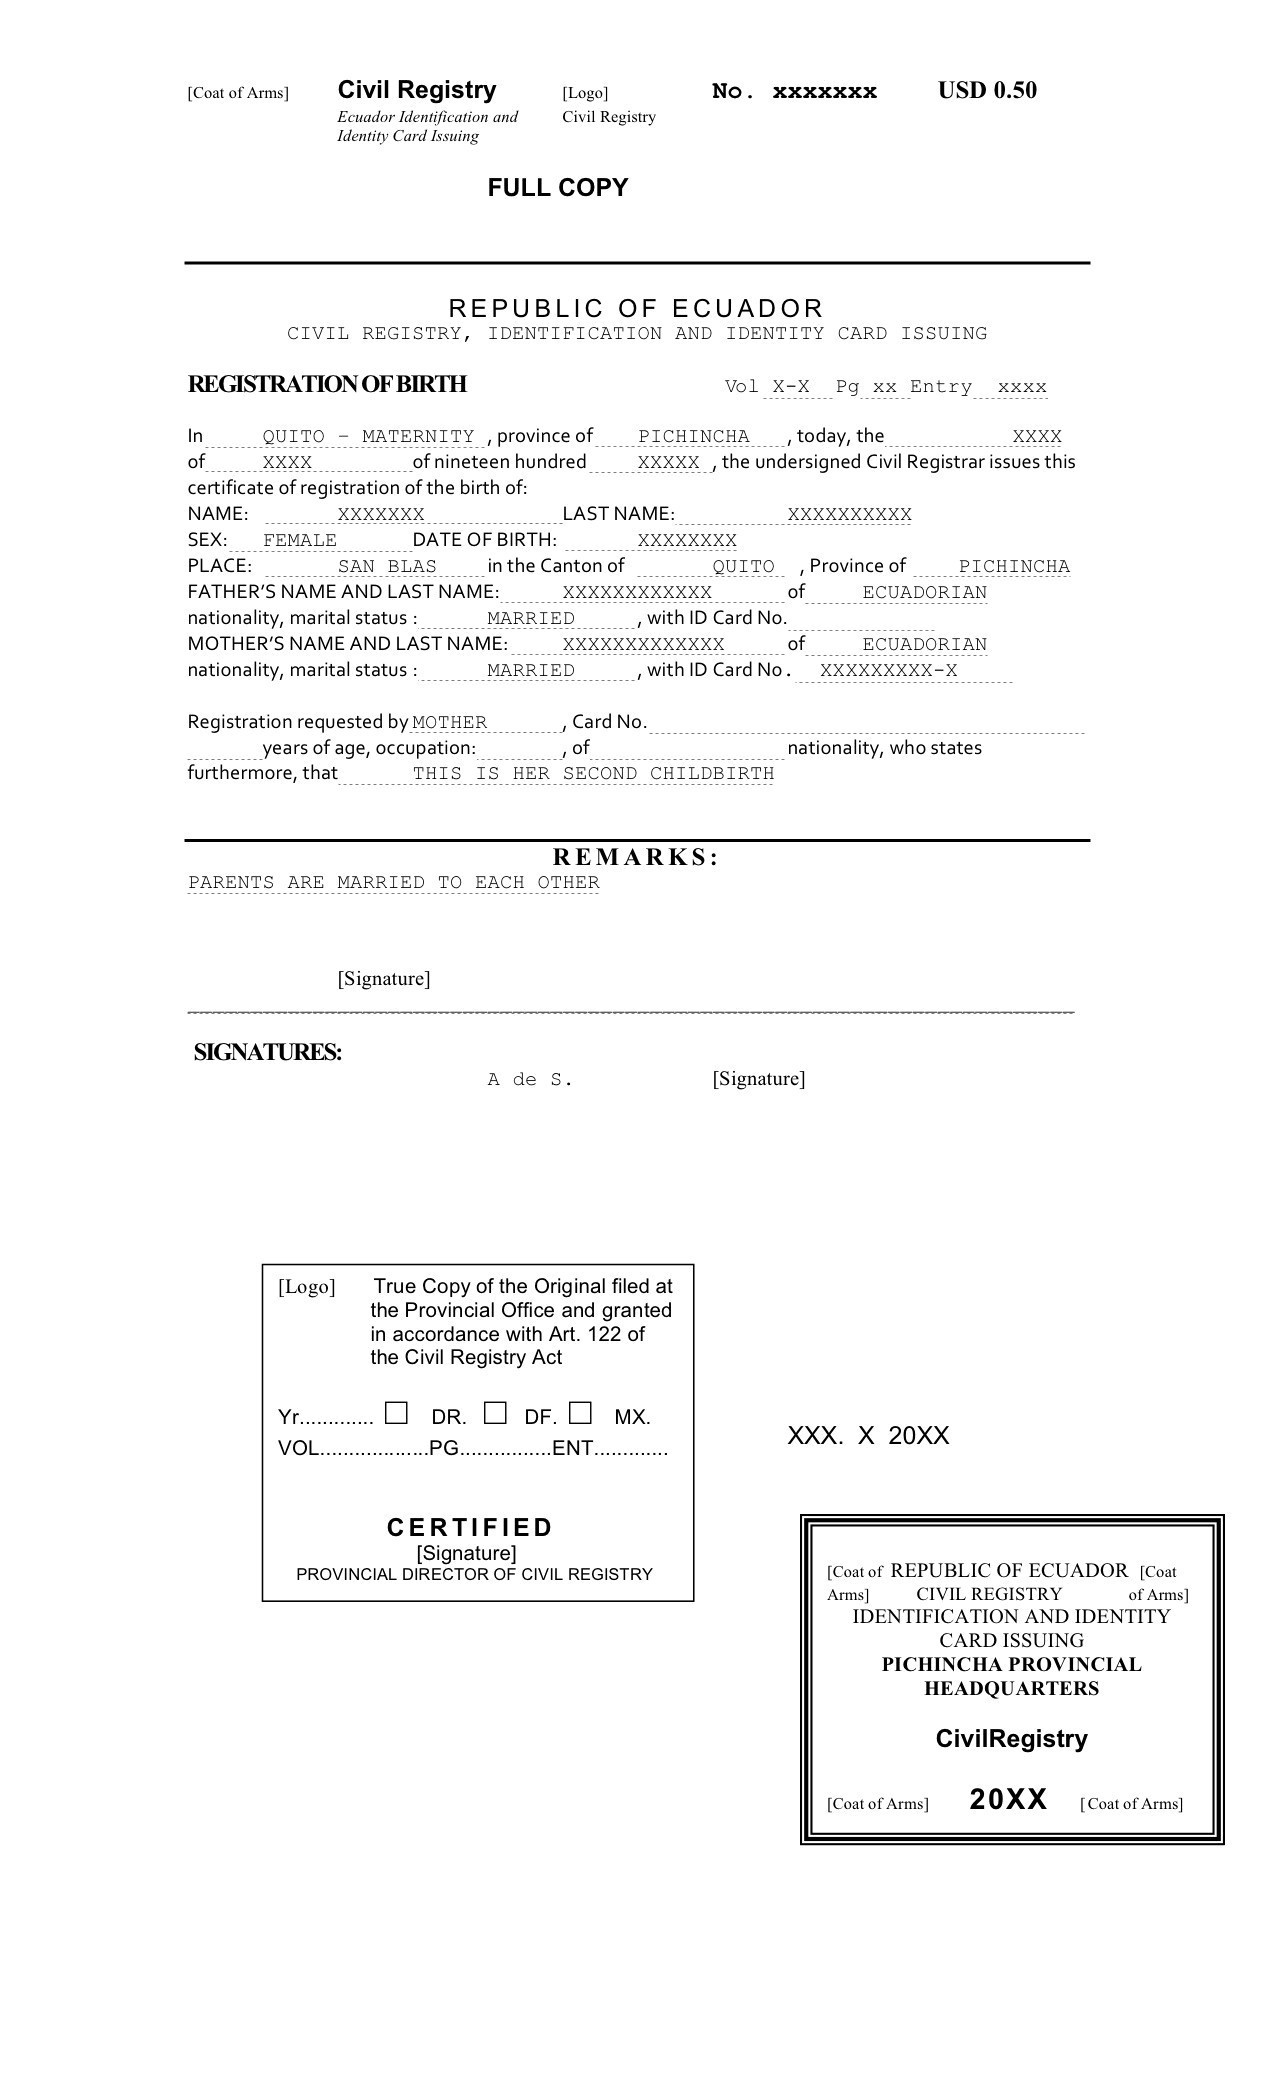 Death Certificate Translation From Spanish To English Sample Throughout Death Certificate Translation Template